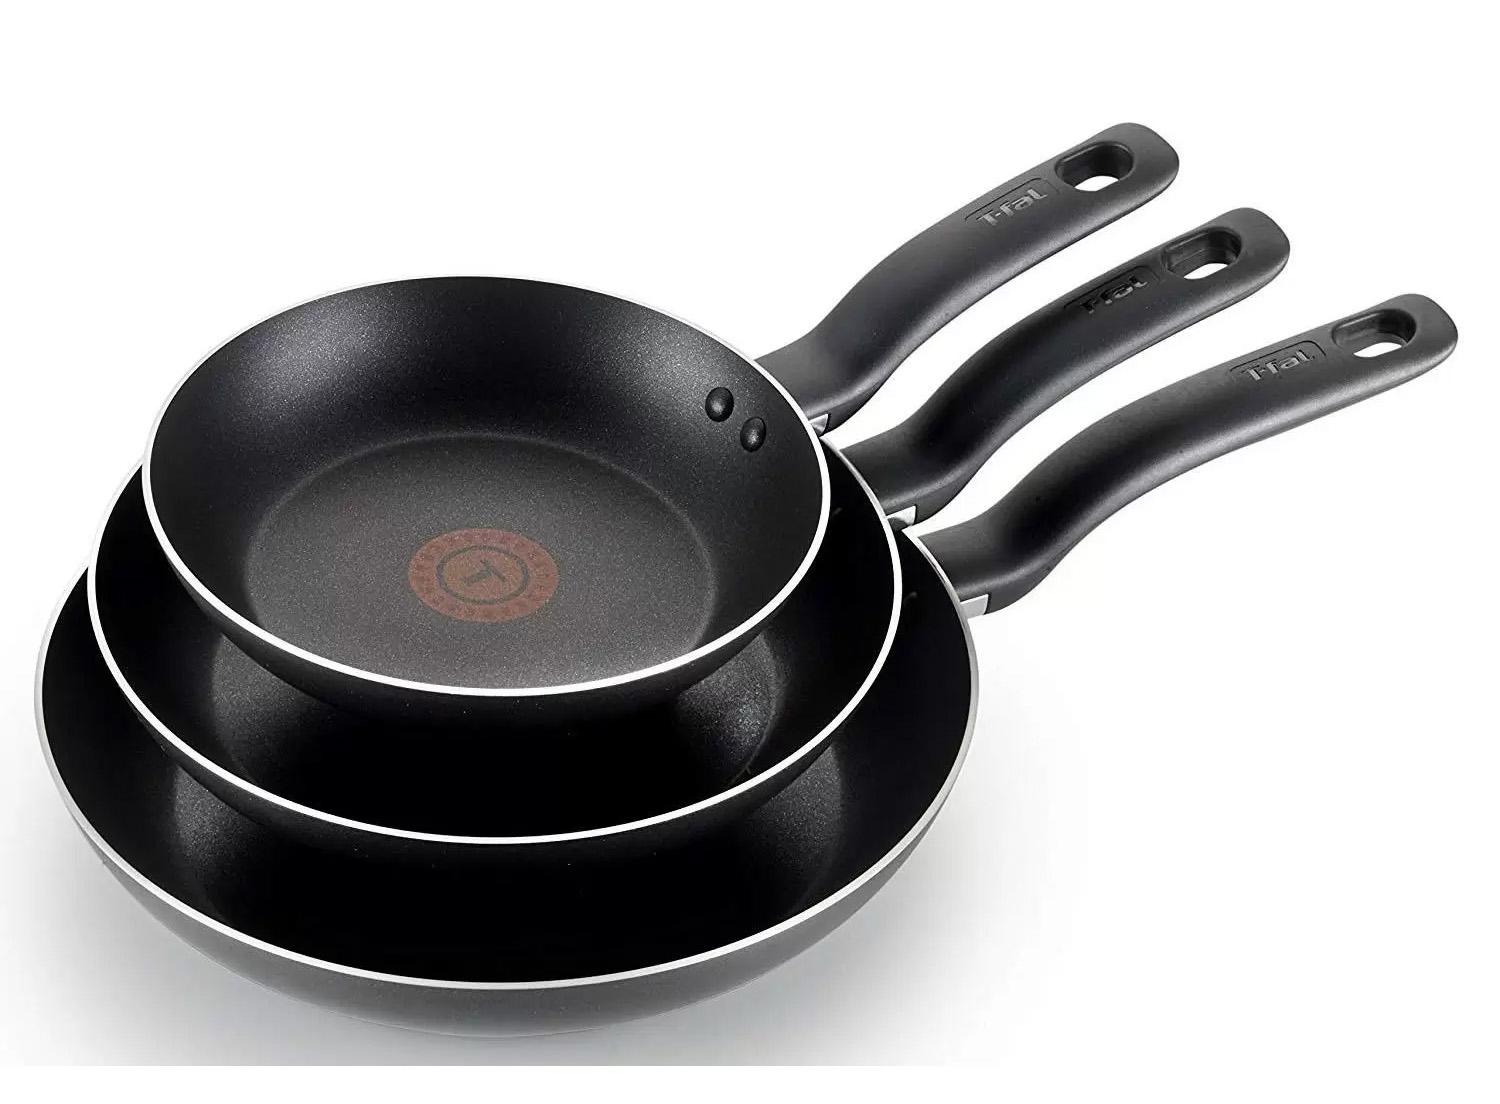 3-Piece T-Fal Specialty Nonstick Fry Pan Set for $12.99